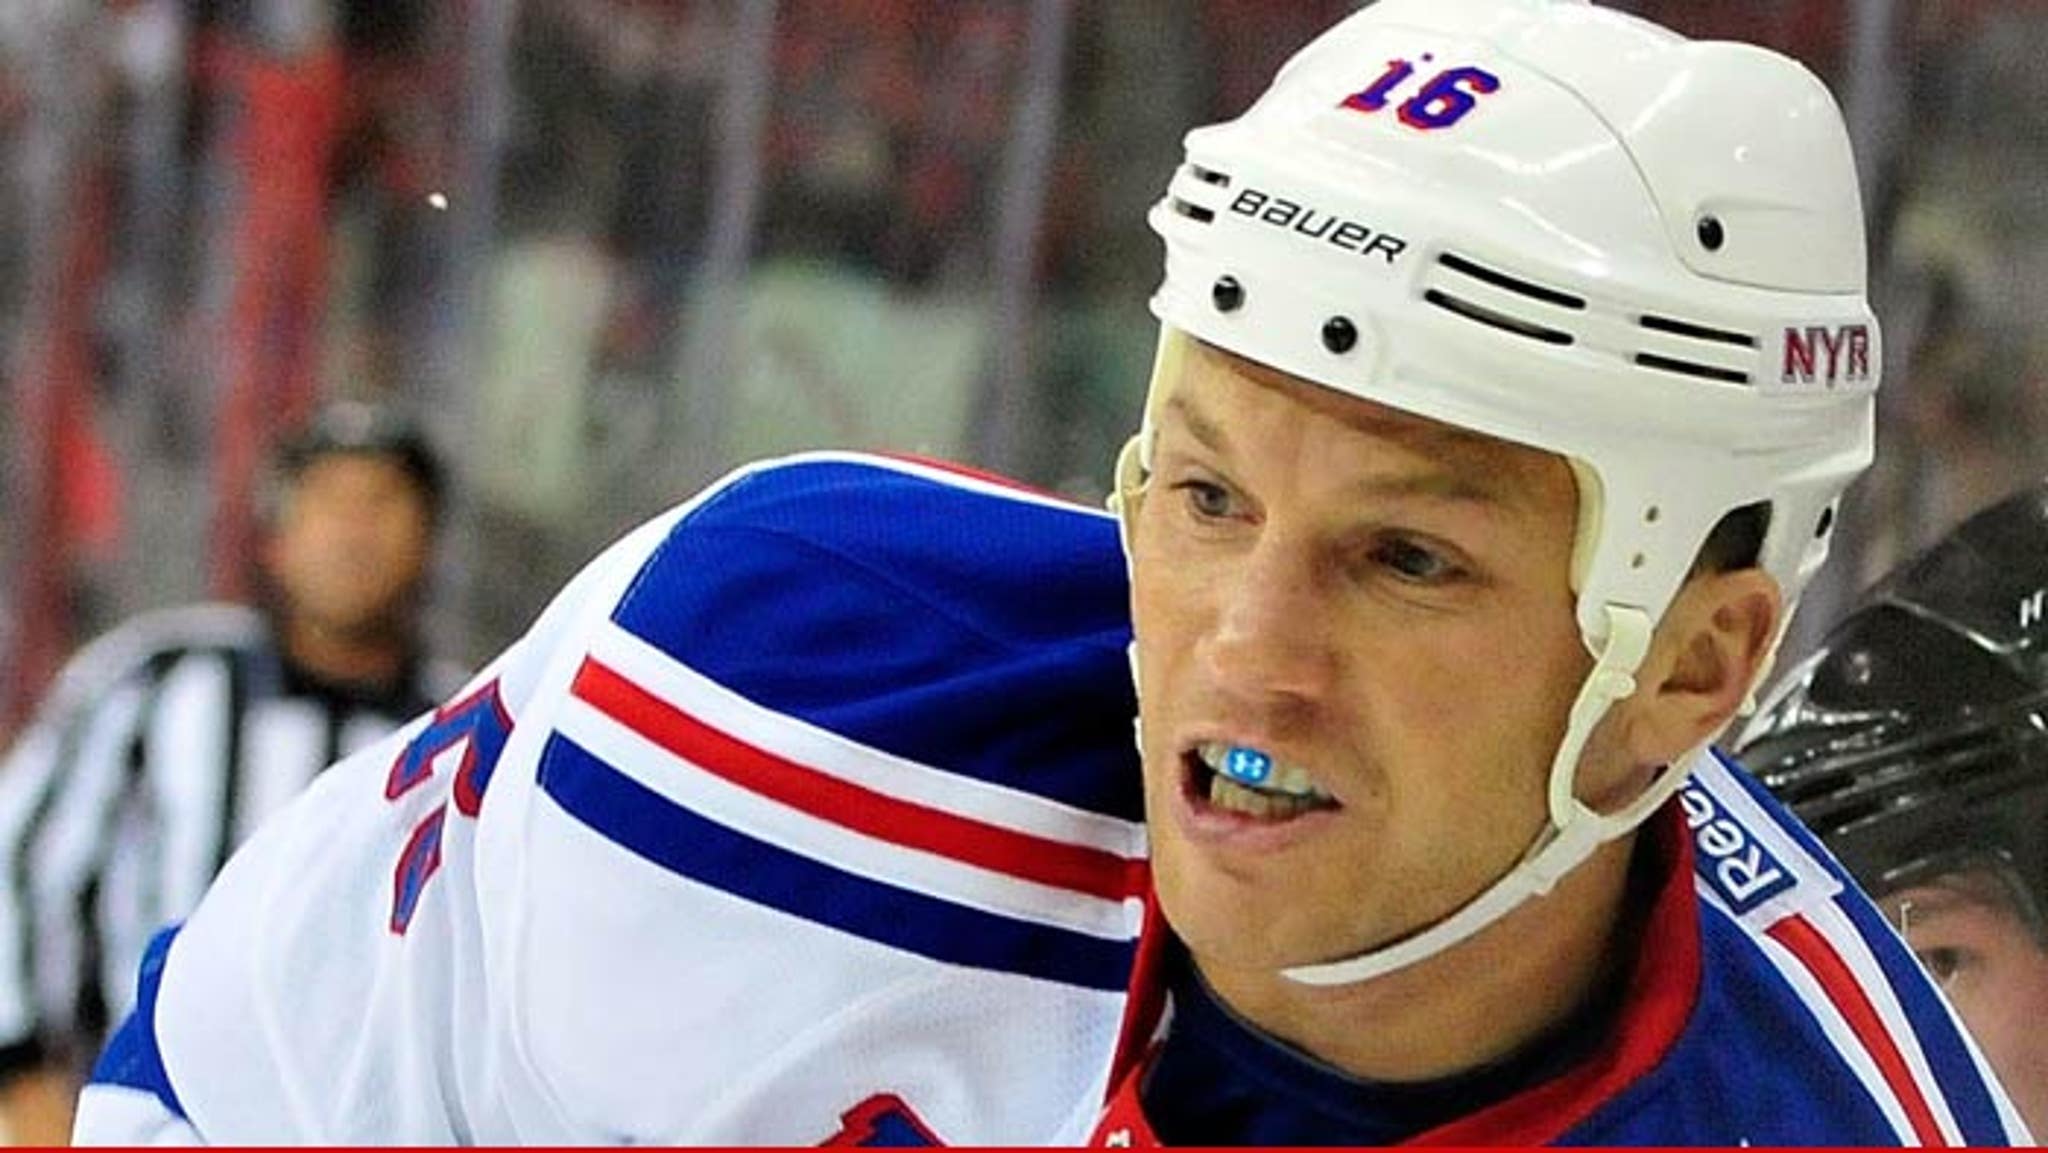 Abused ex-NHL player Sean Avery: 'I deserved it', National Sports